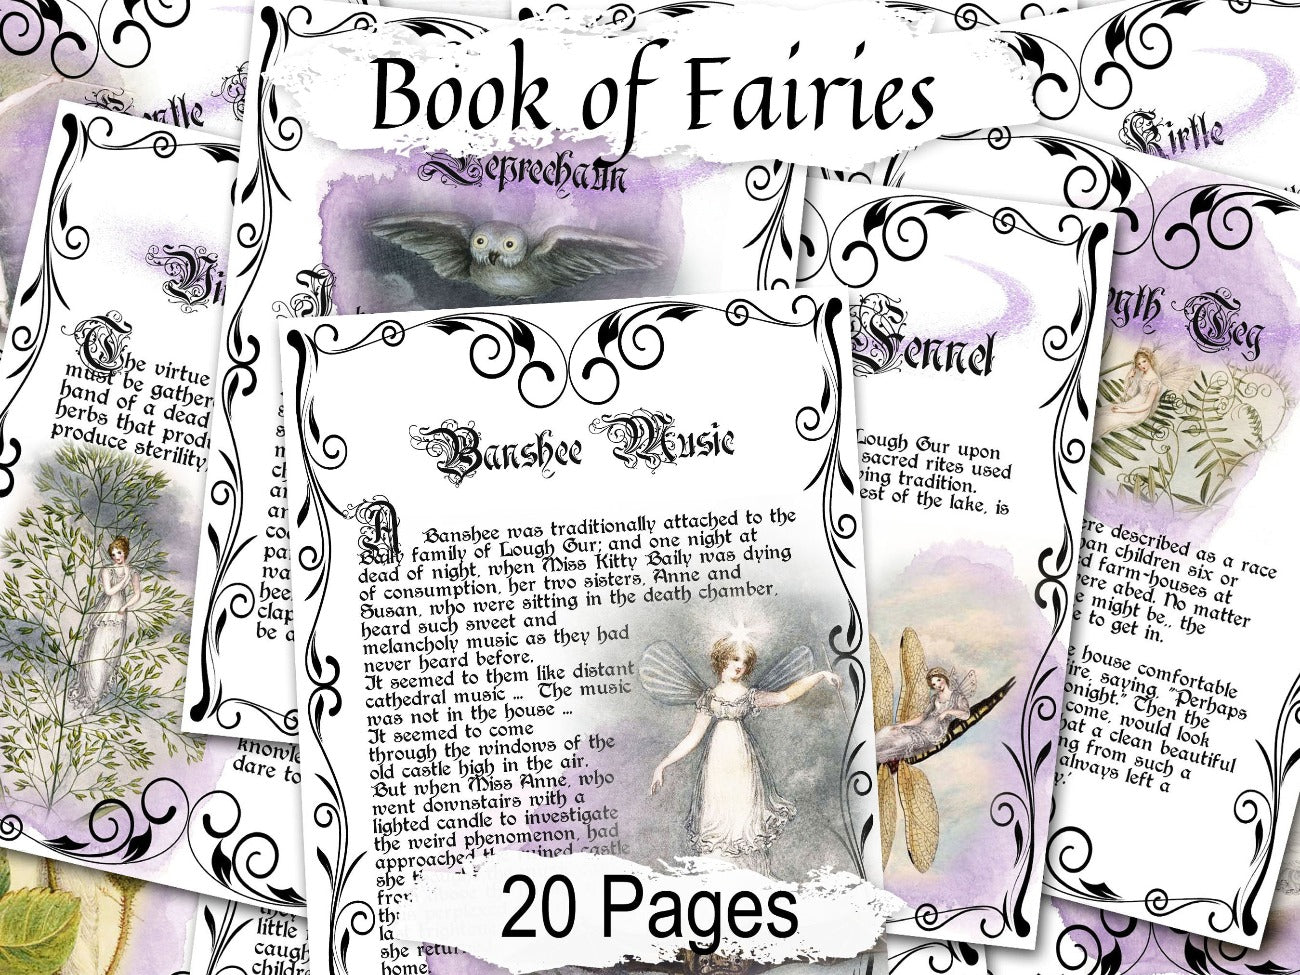 FAERY LORE Version II - 19th Century Europe, Celtic Fae Beliefs, 20 Pages Printable Journal, Authentic Fairy Spellbook, Once Upon a Time - Morgana Magick Spell